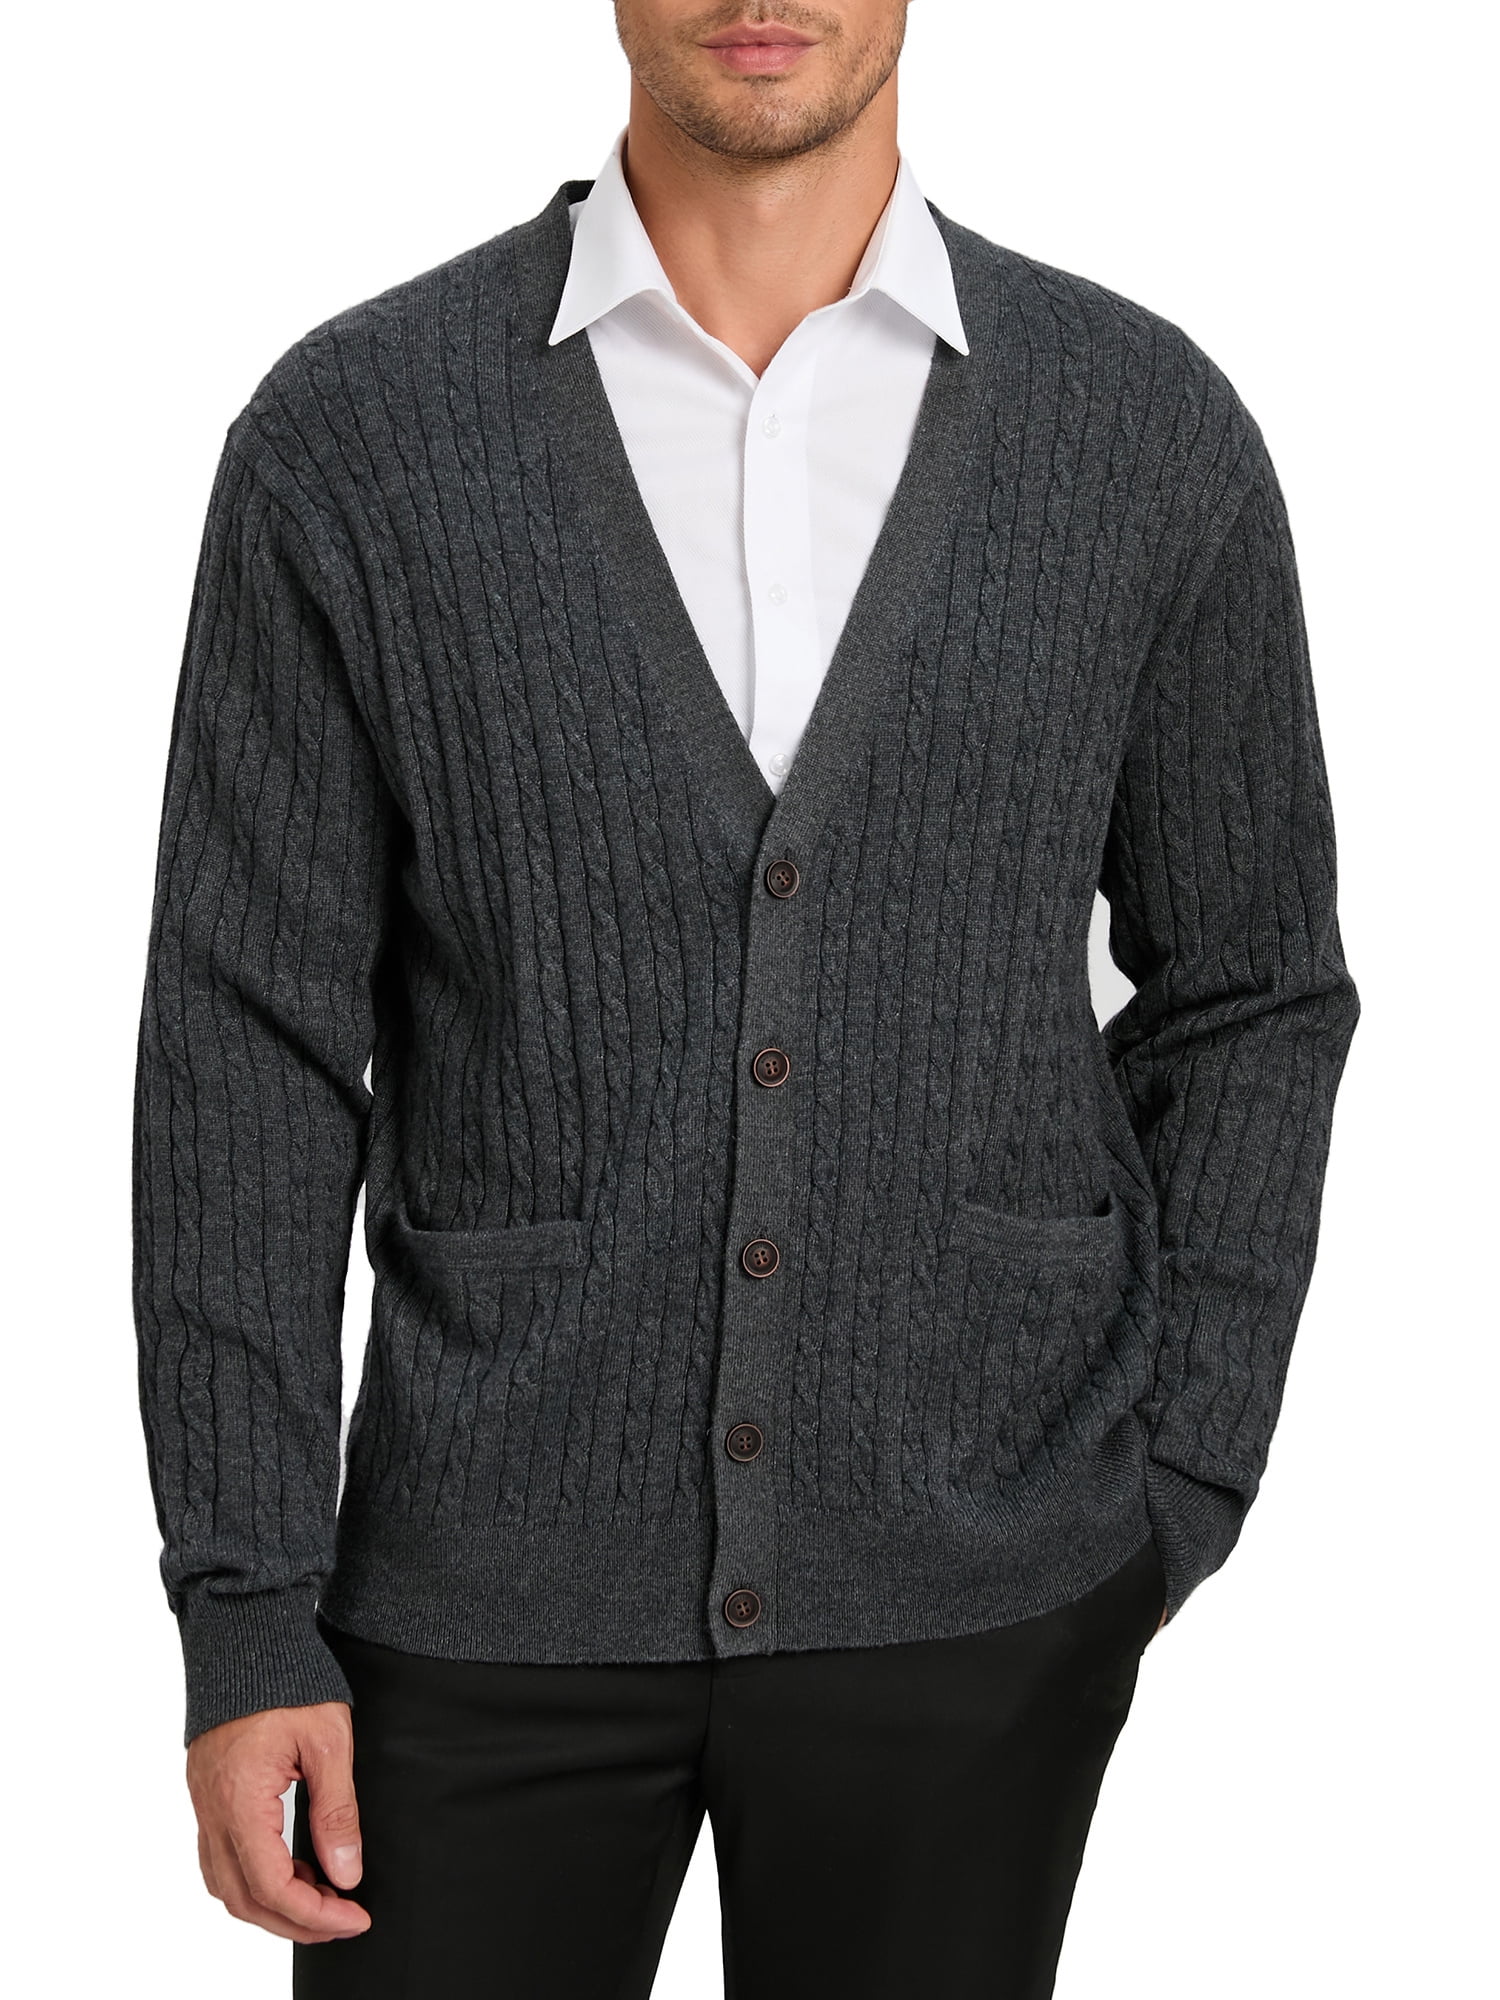 Kallspin Men’s Wool Blend V-Neck Cable-Knit Cardigans Sweaters ...